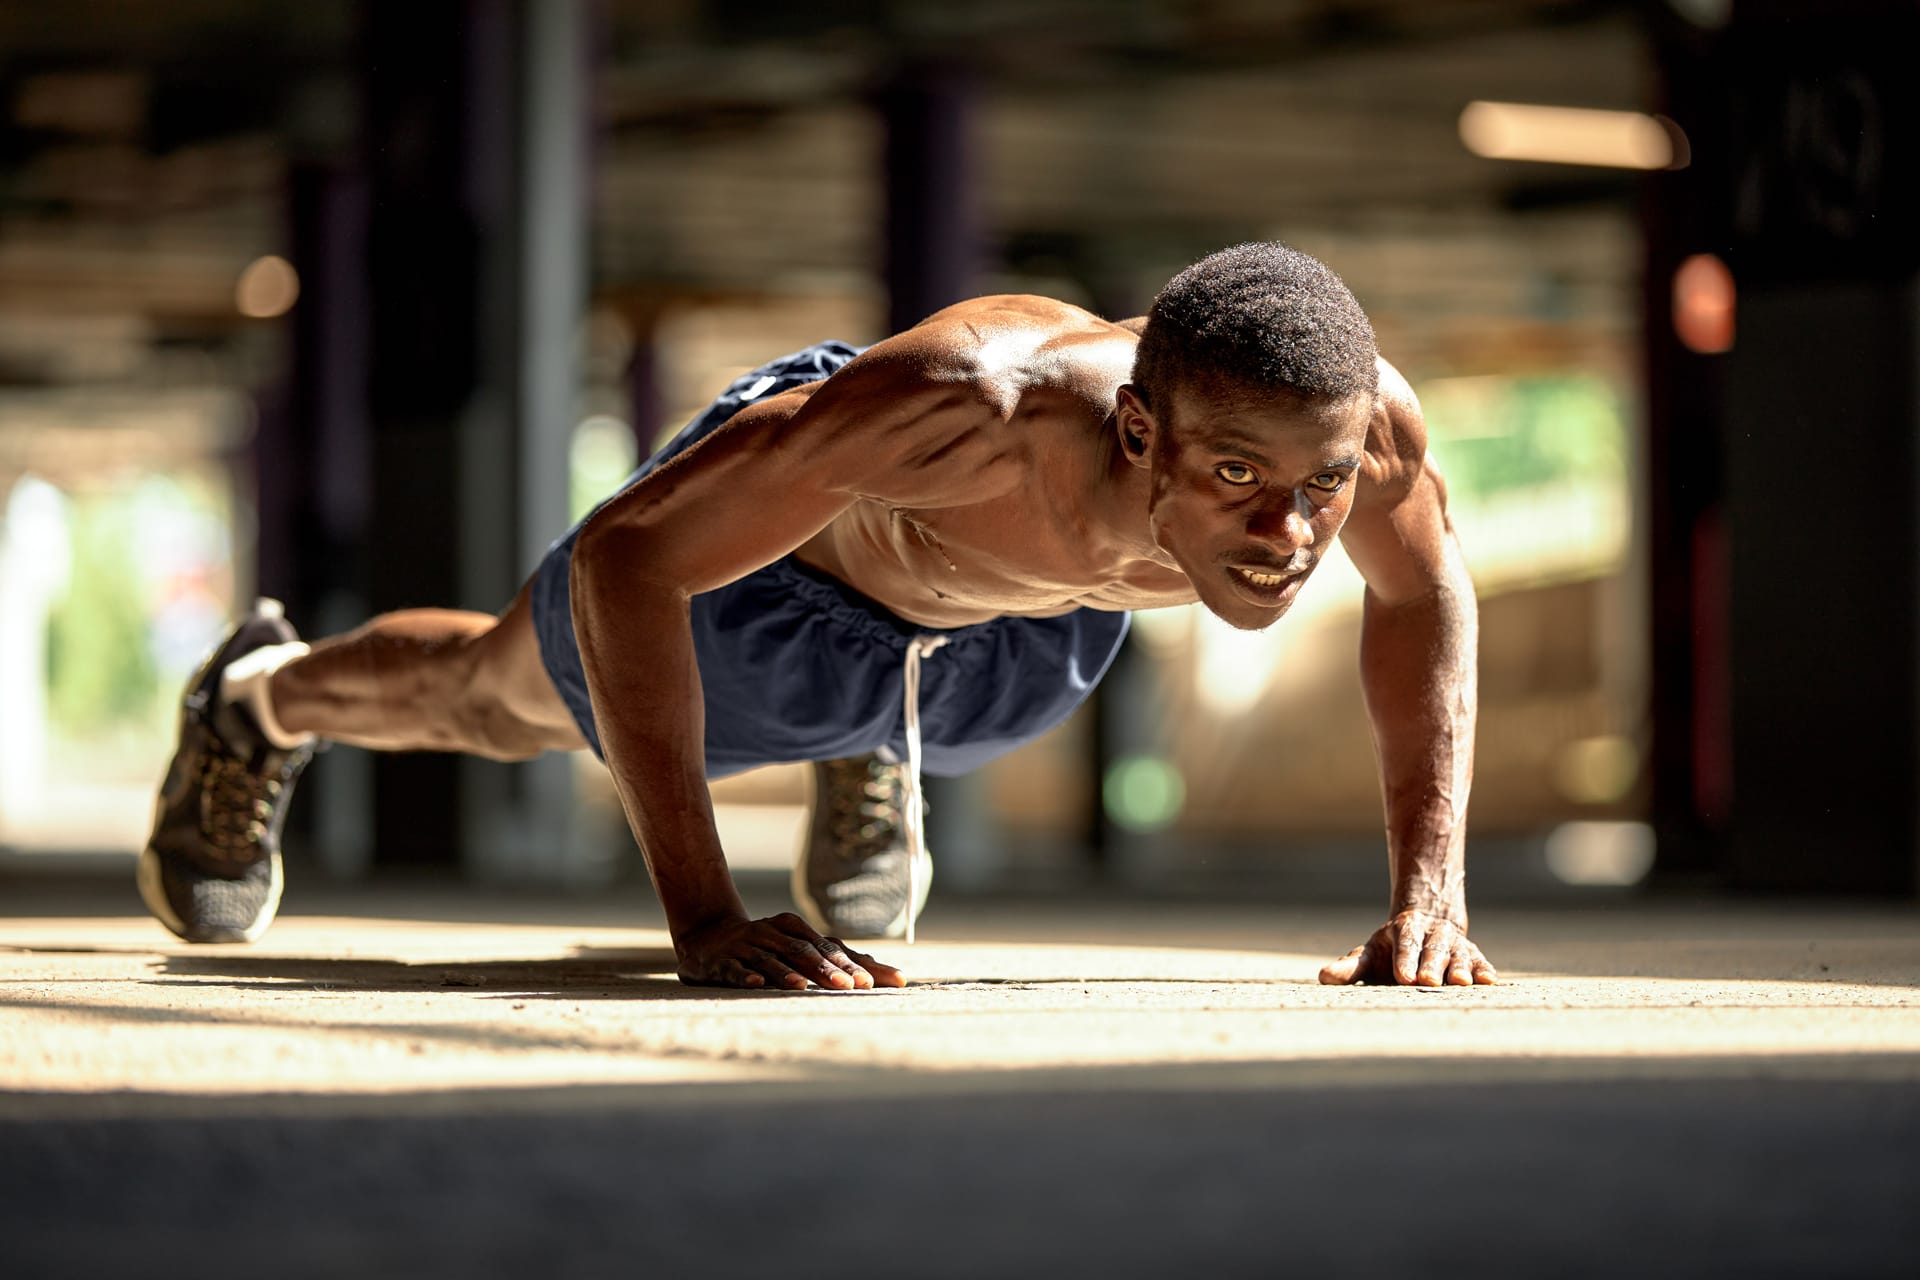 Push ups during workout street modern downtown with urban background